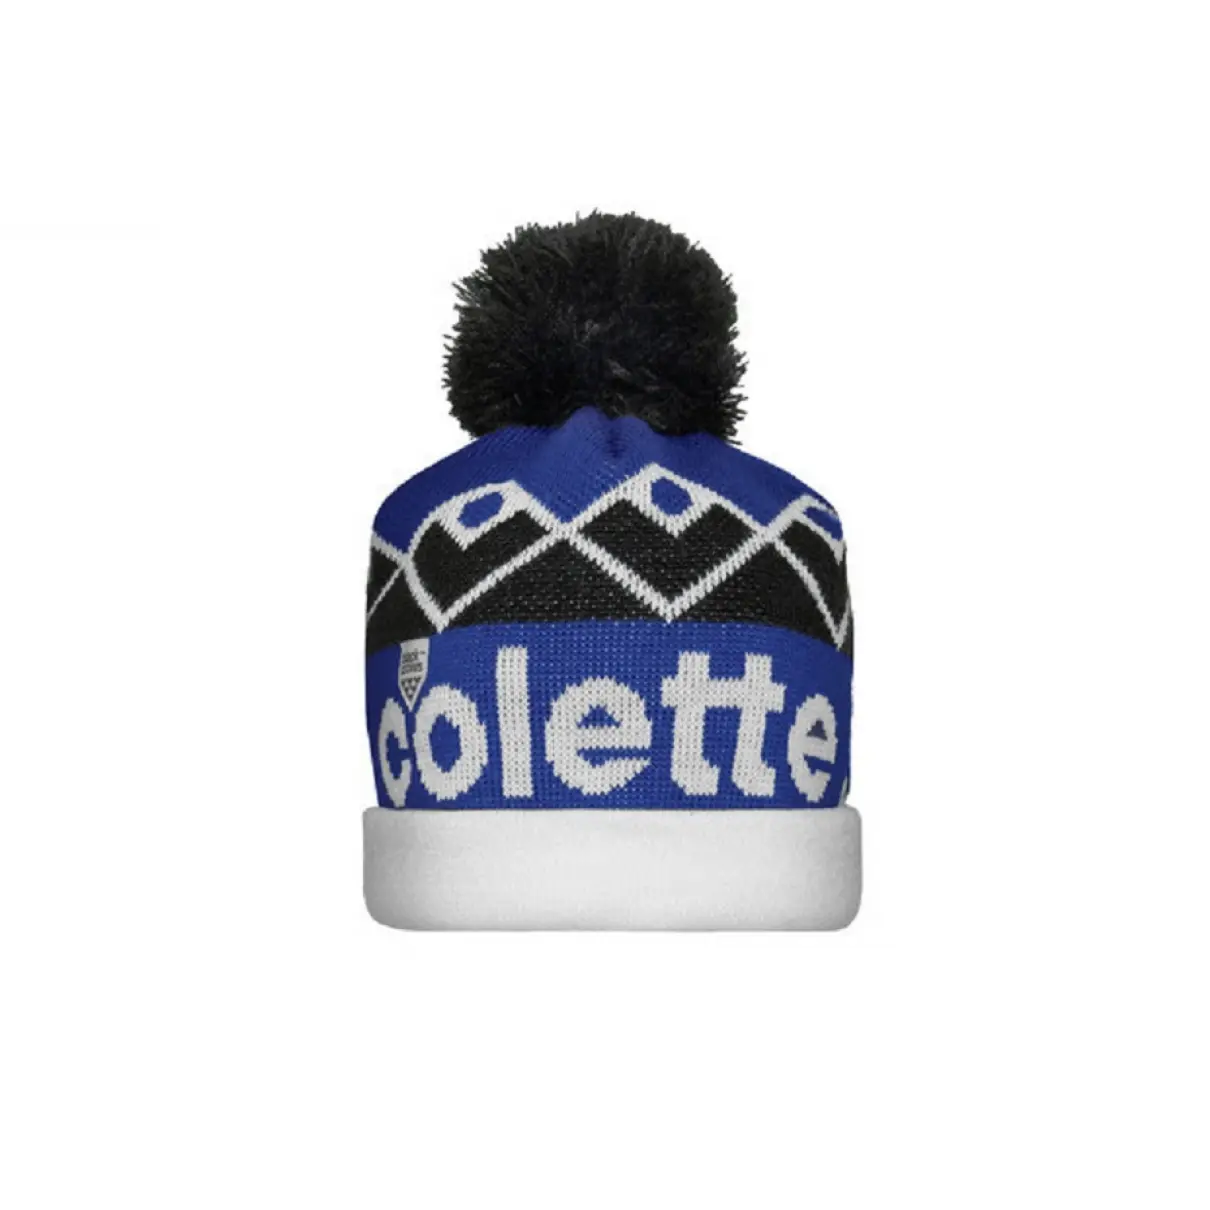 Colette Wool beanie for sale